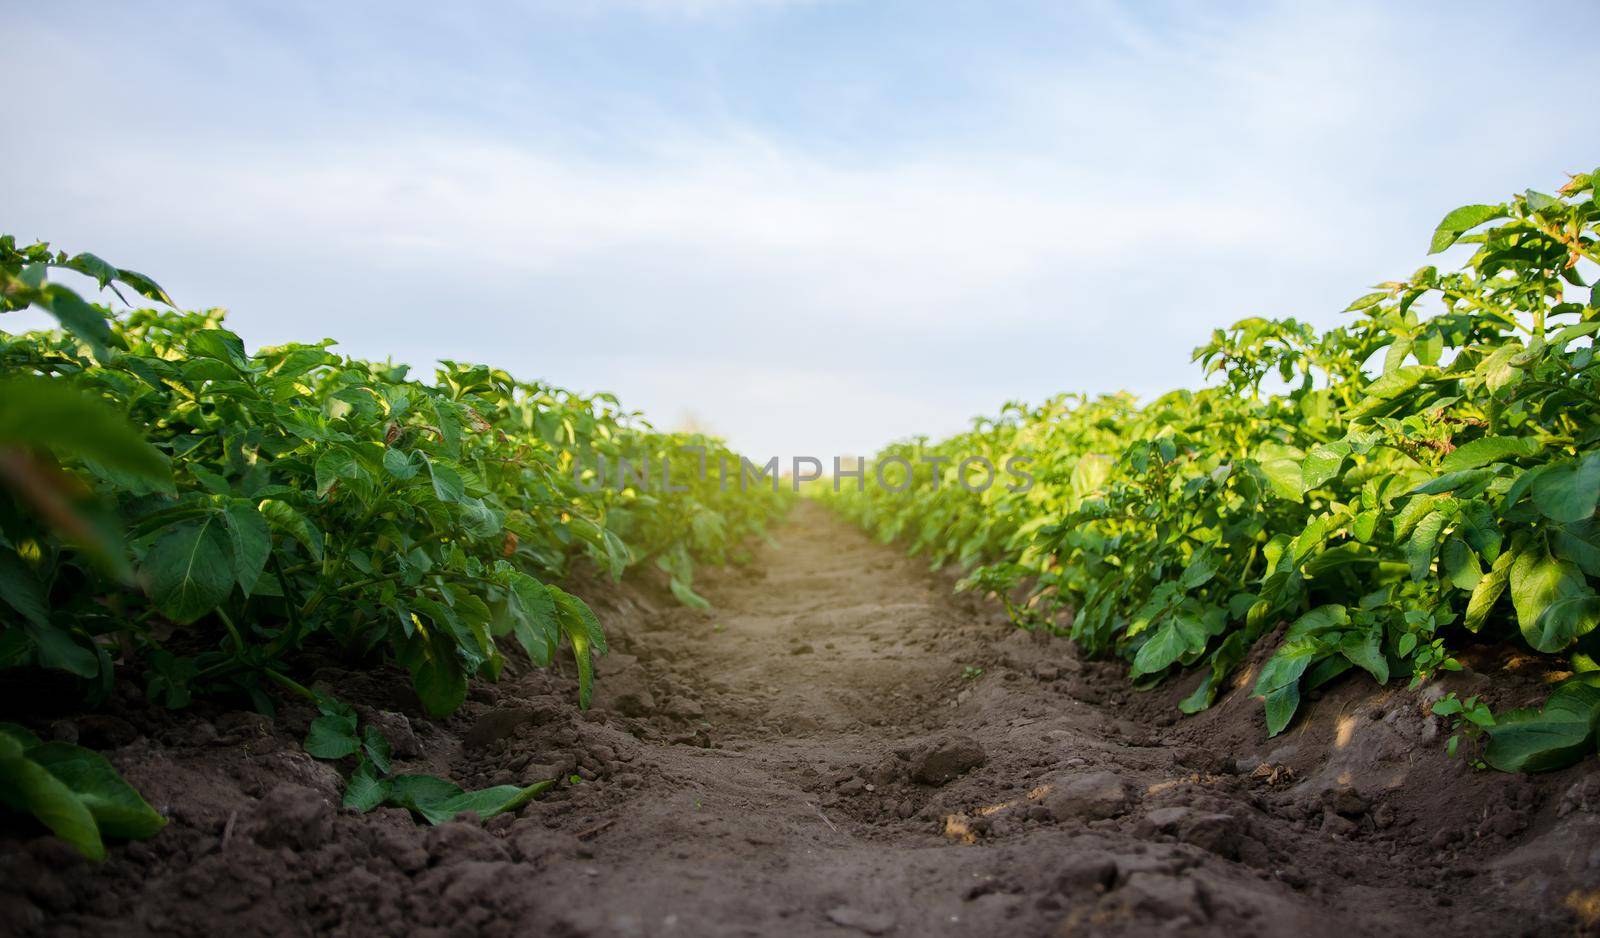 The path between the rows of the potato plantation. Growing food vegetables. Agroindustry. Cultivation. Organization of plantation in the field. Olericulture. Agriculture farming on open ground.